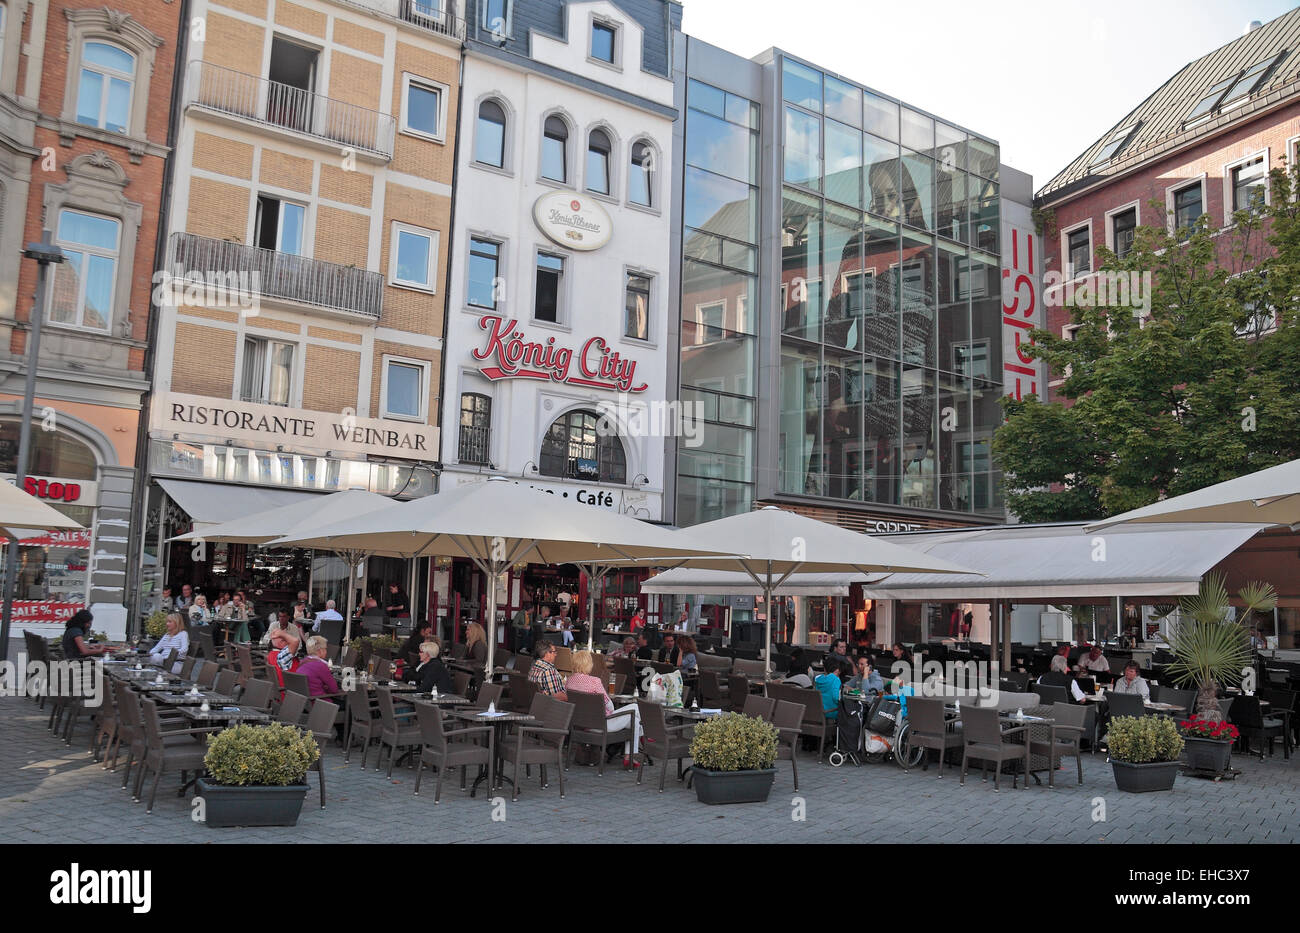 General view of cafes and bars (inc Konig City) on Holzgraben 7, Aachen, Germany. Stock Photo